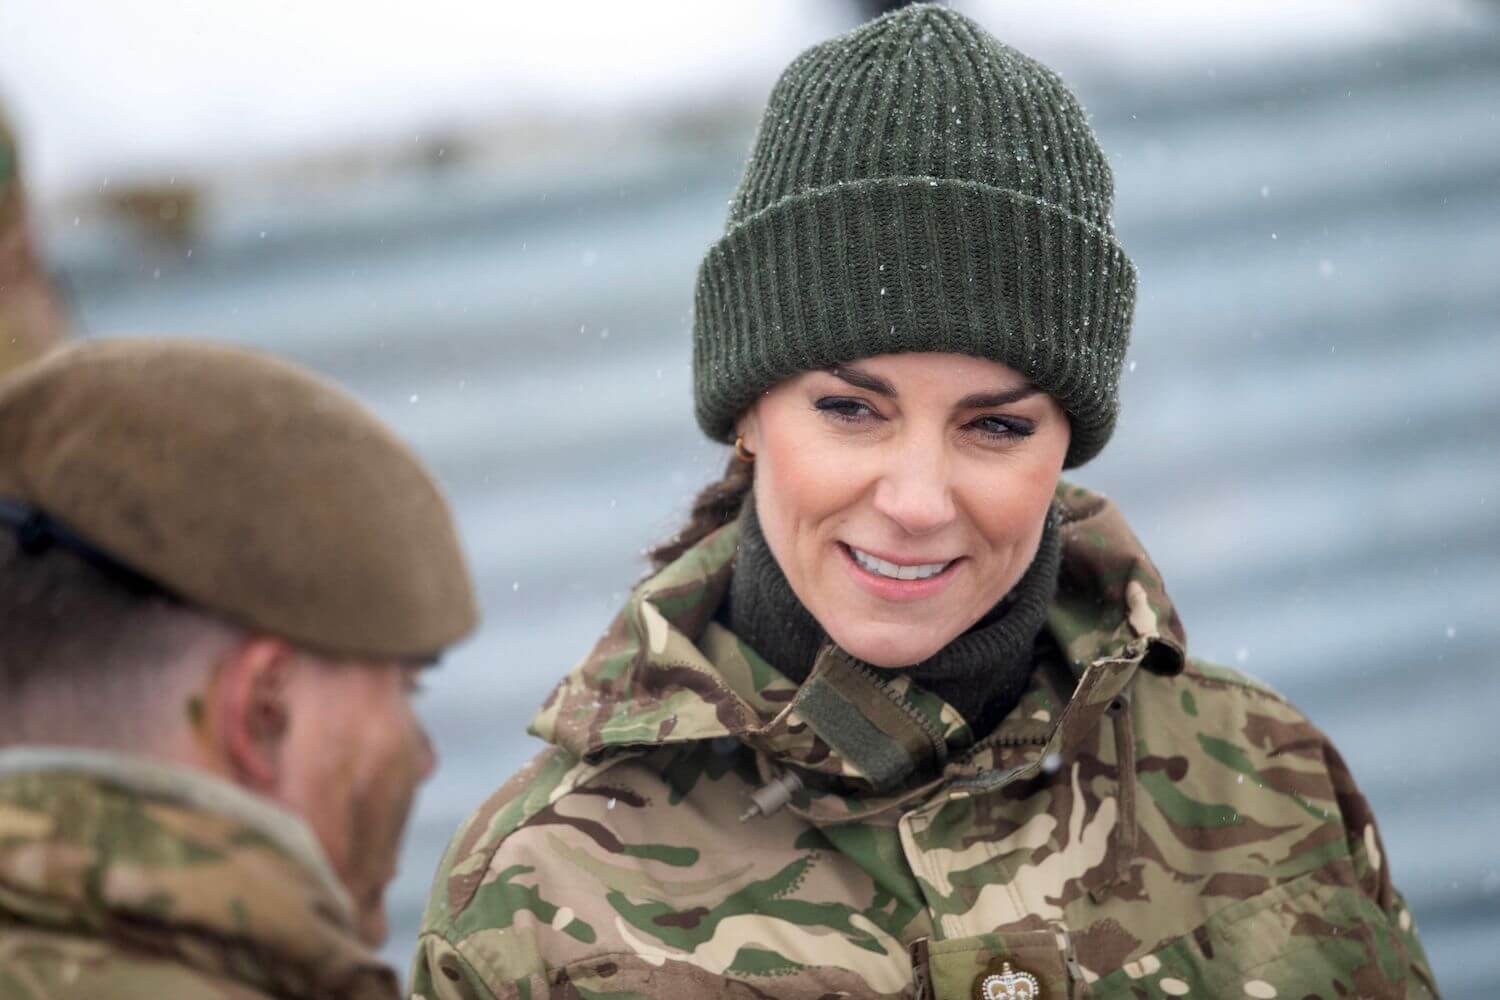 Kate Middleton smiles while wearing a camouflage top and a knit hat